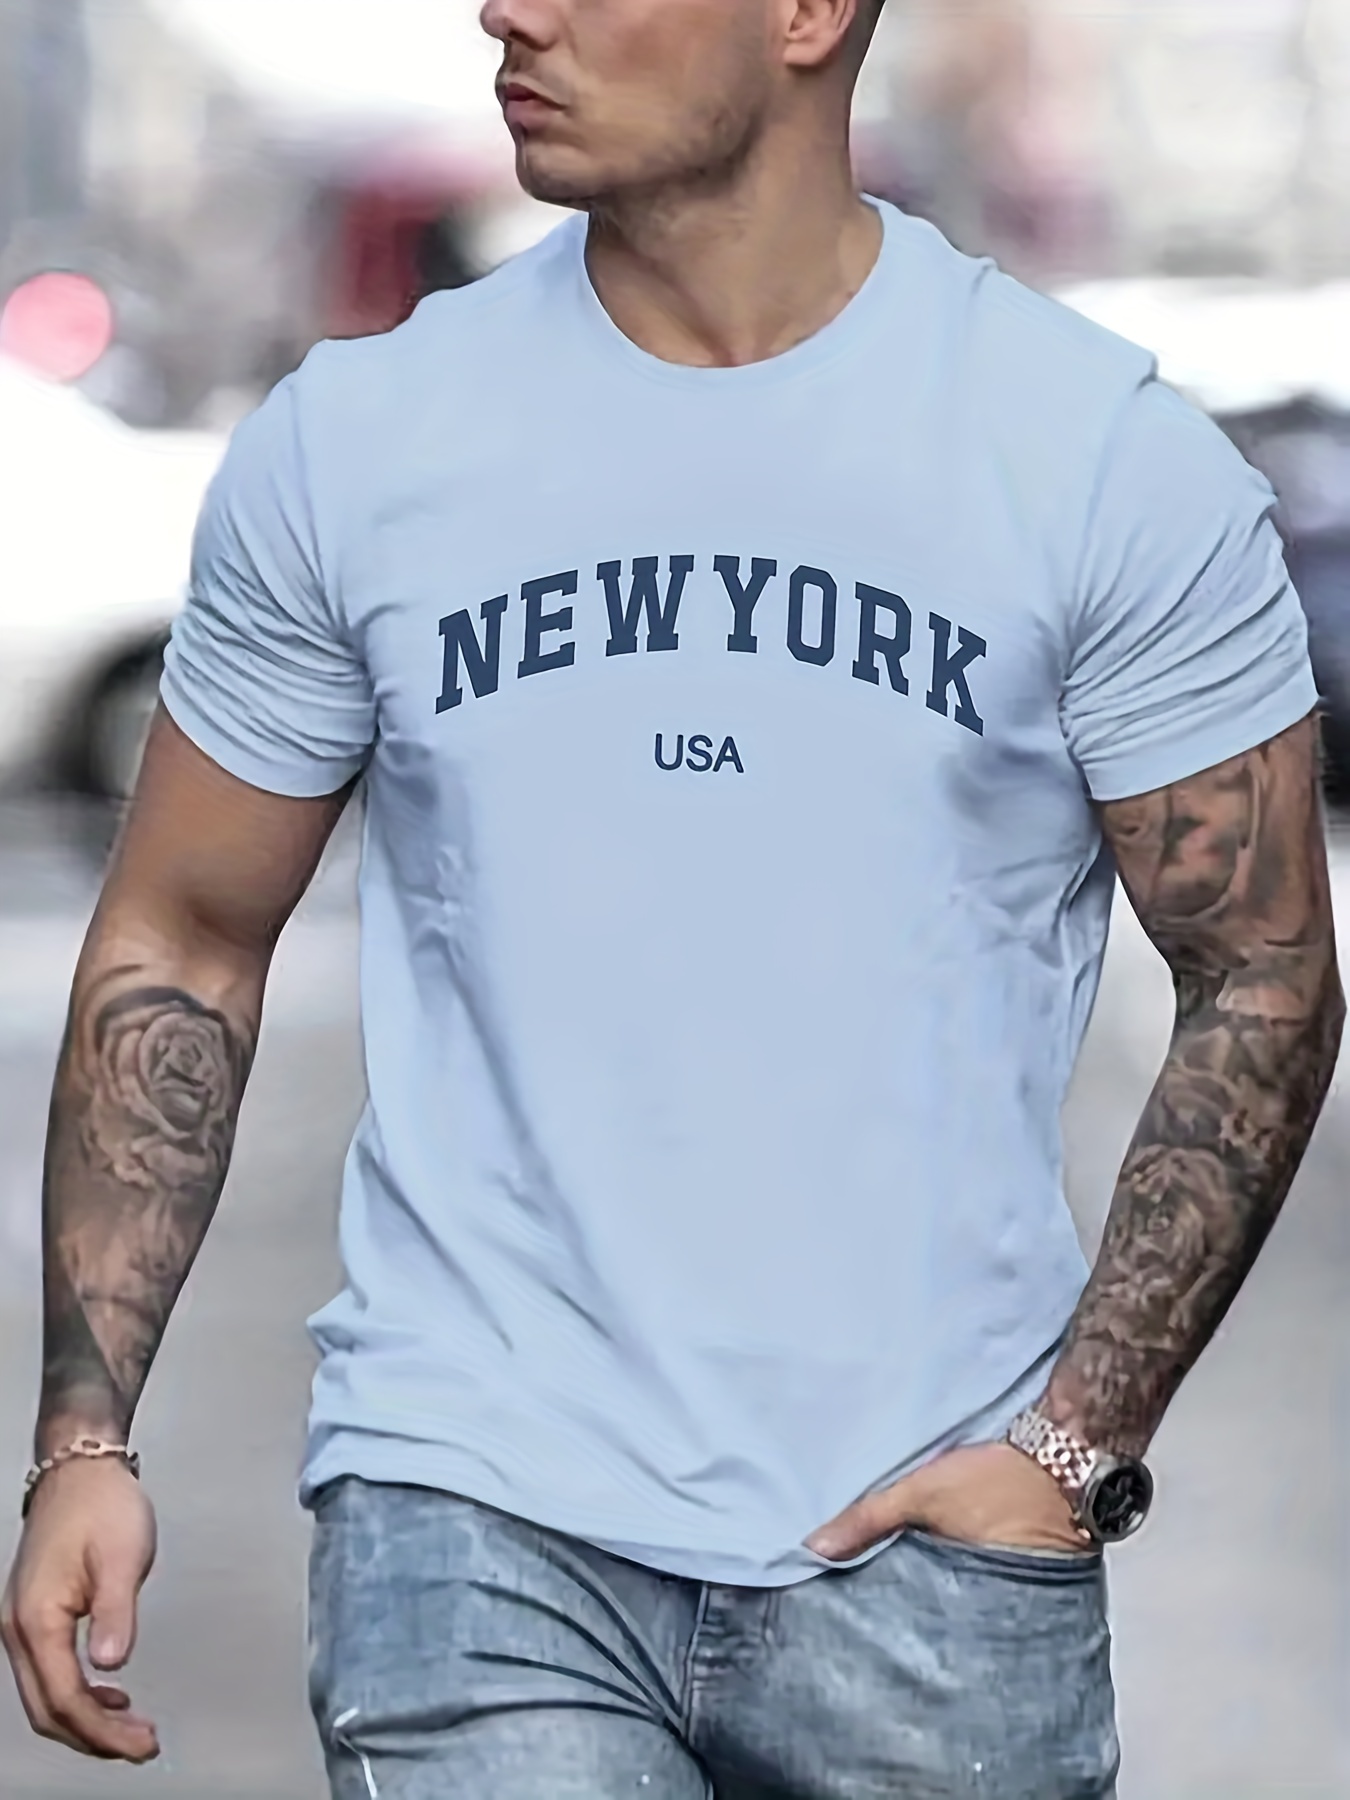 new york usa print t shirt tees for men casual short sleeve tshirt for summer spring fall tops as gifts details 0